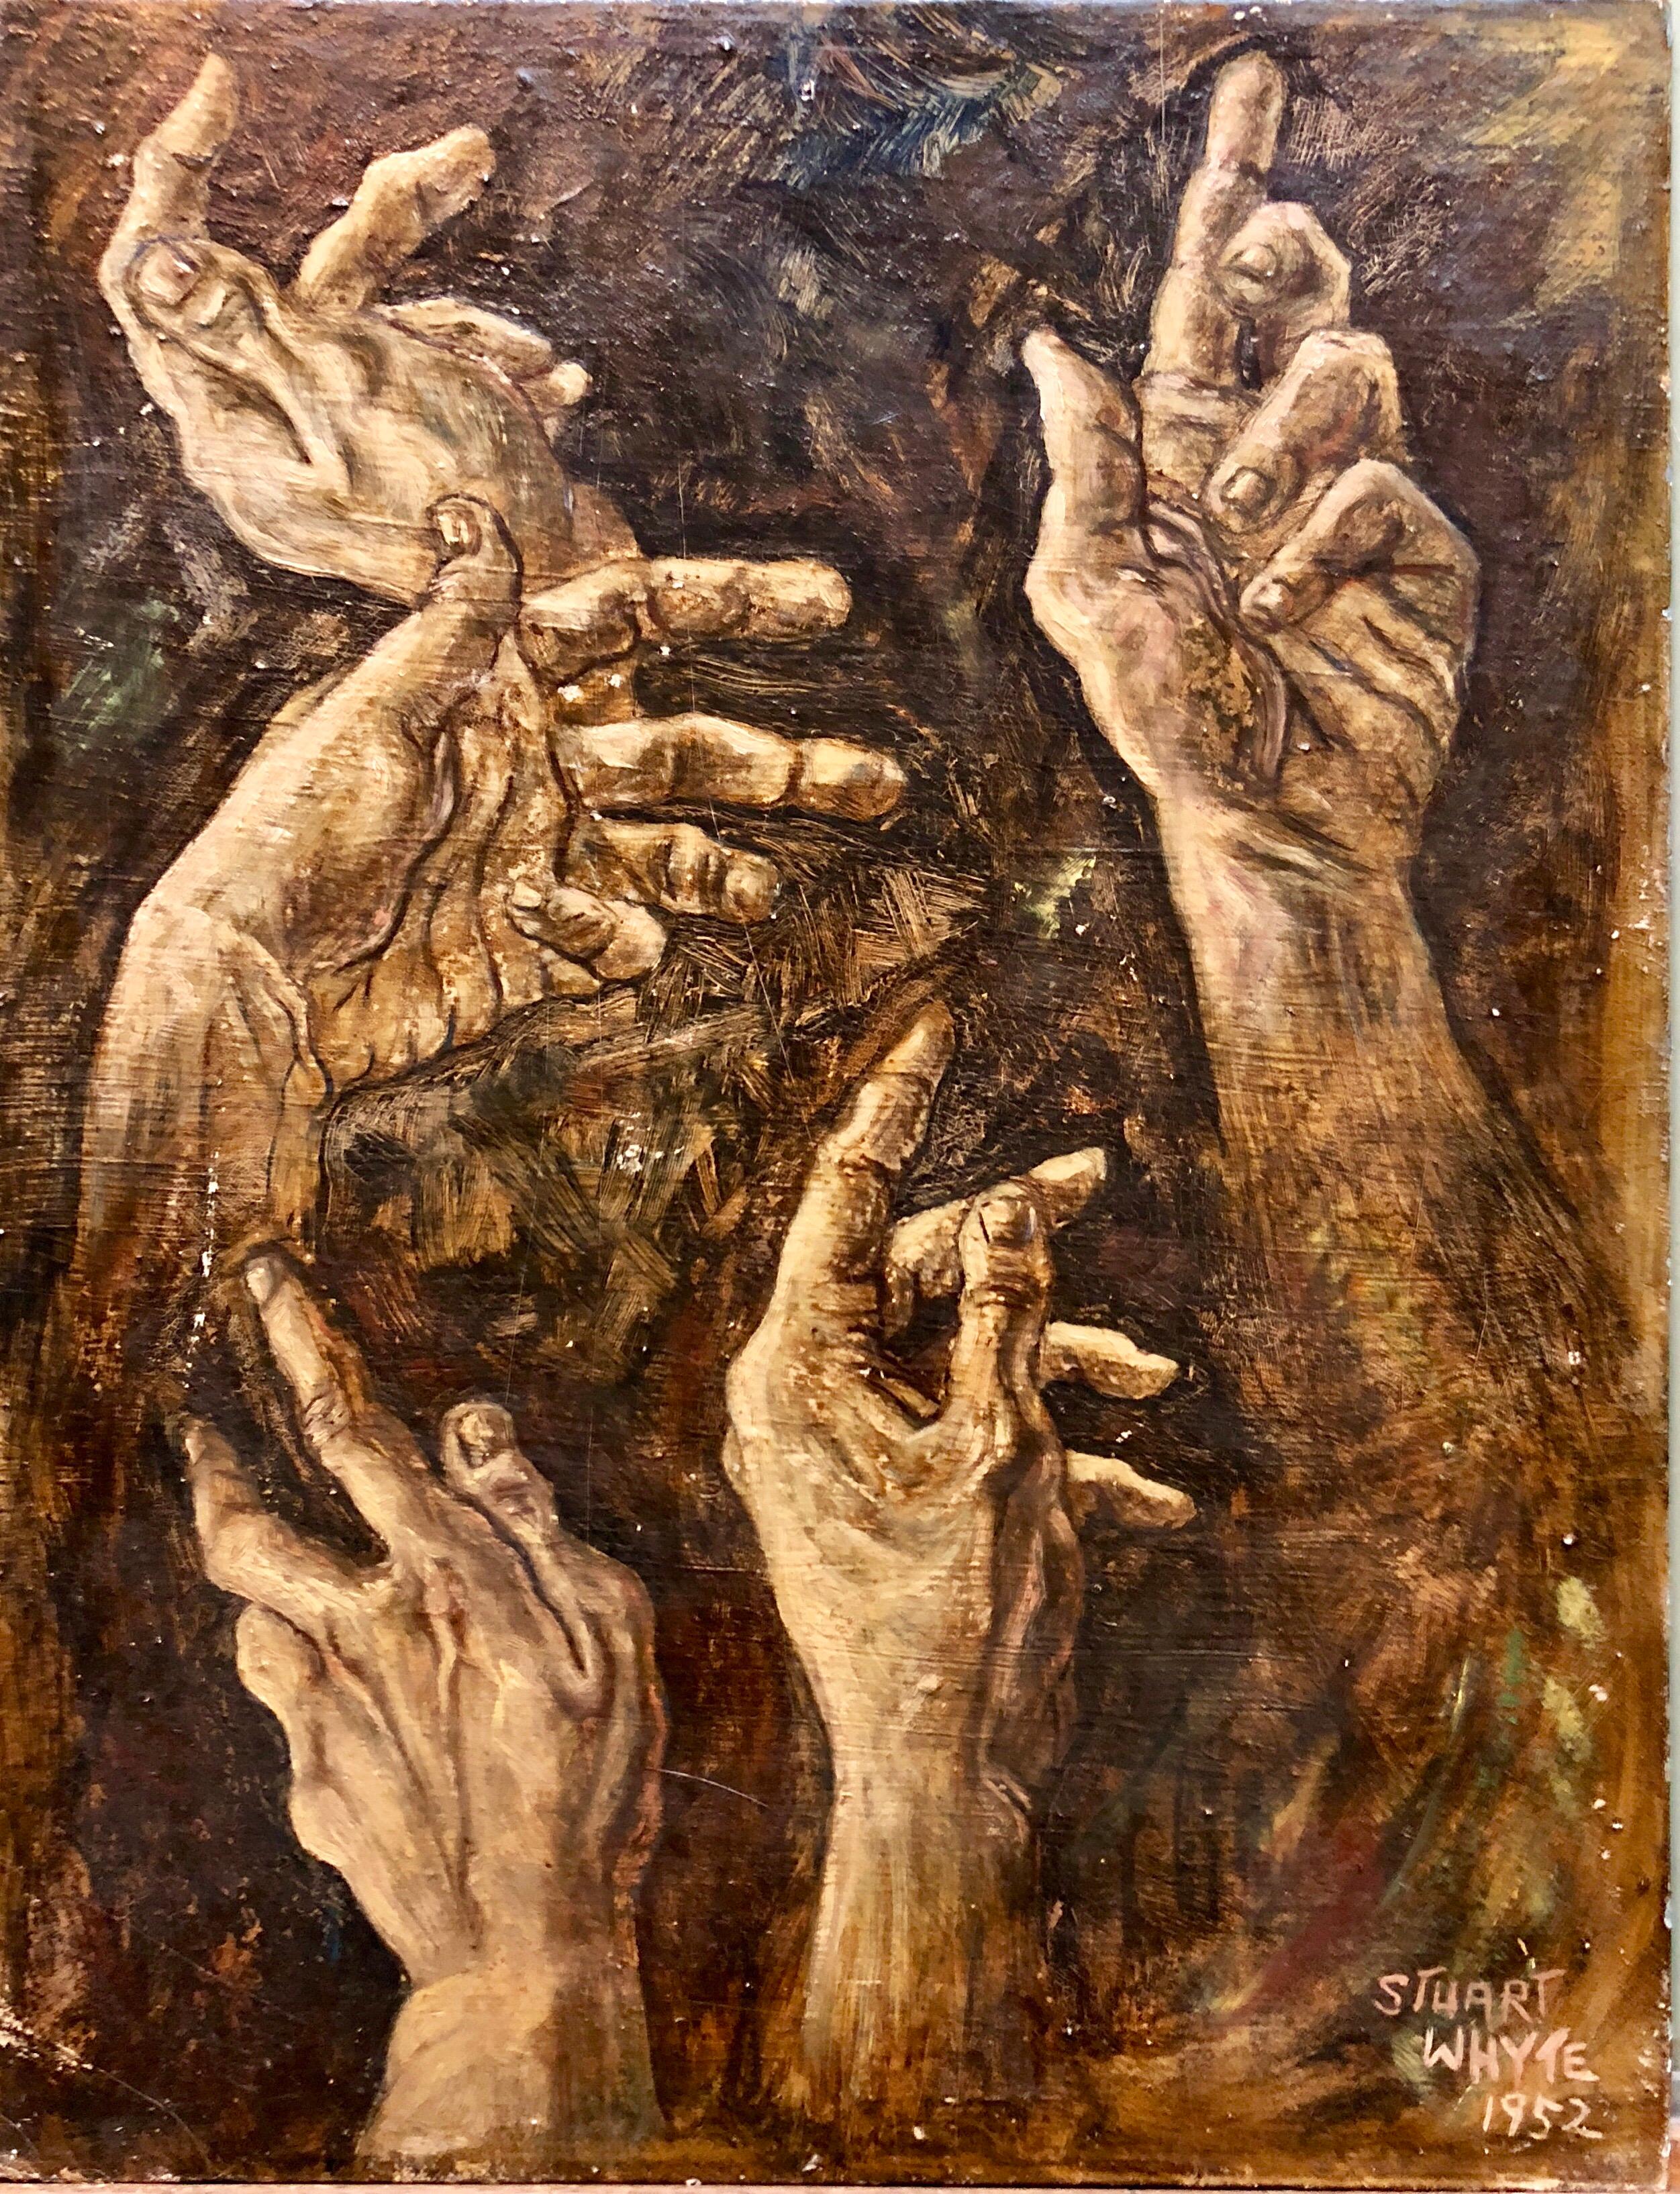 Unknown Figurative Painting - 1950s Academic Realistic Study of Hands Oil Painting Signed Stuart Whyte